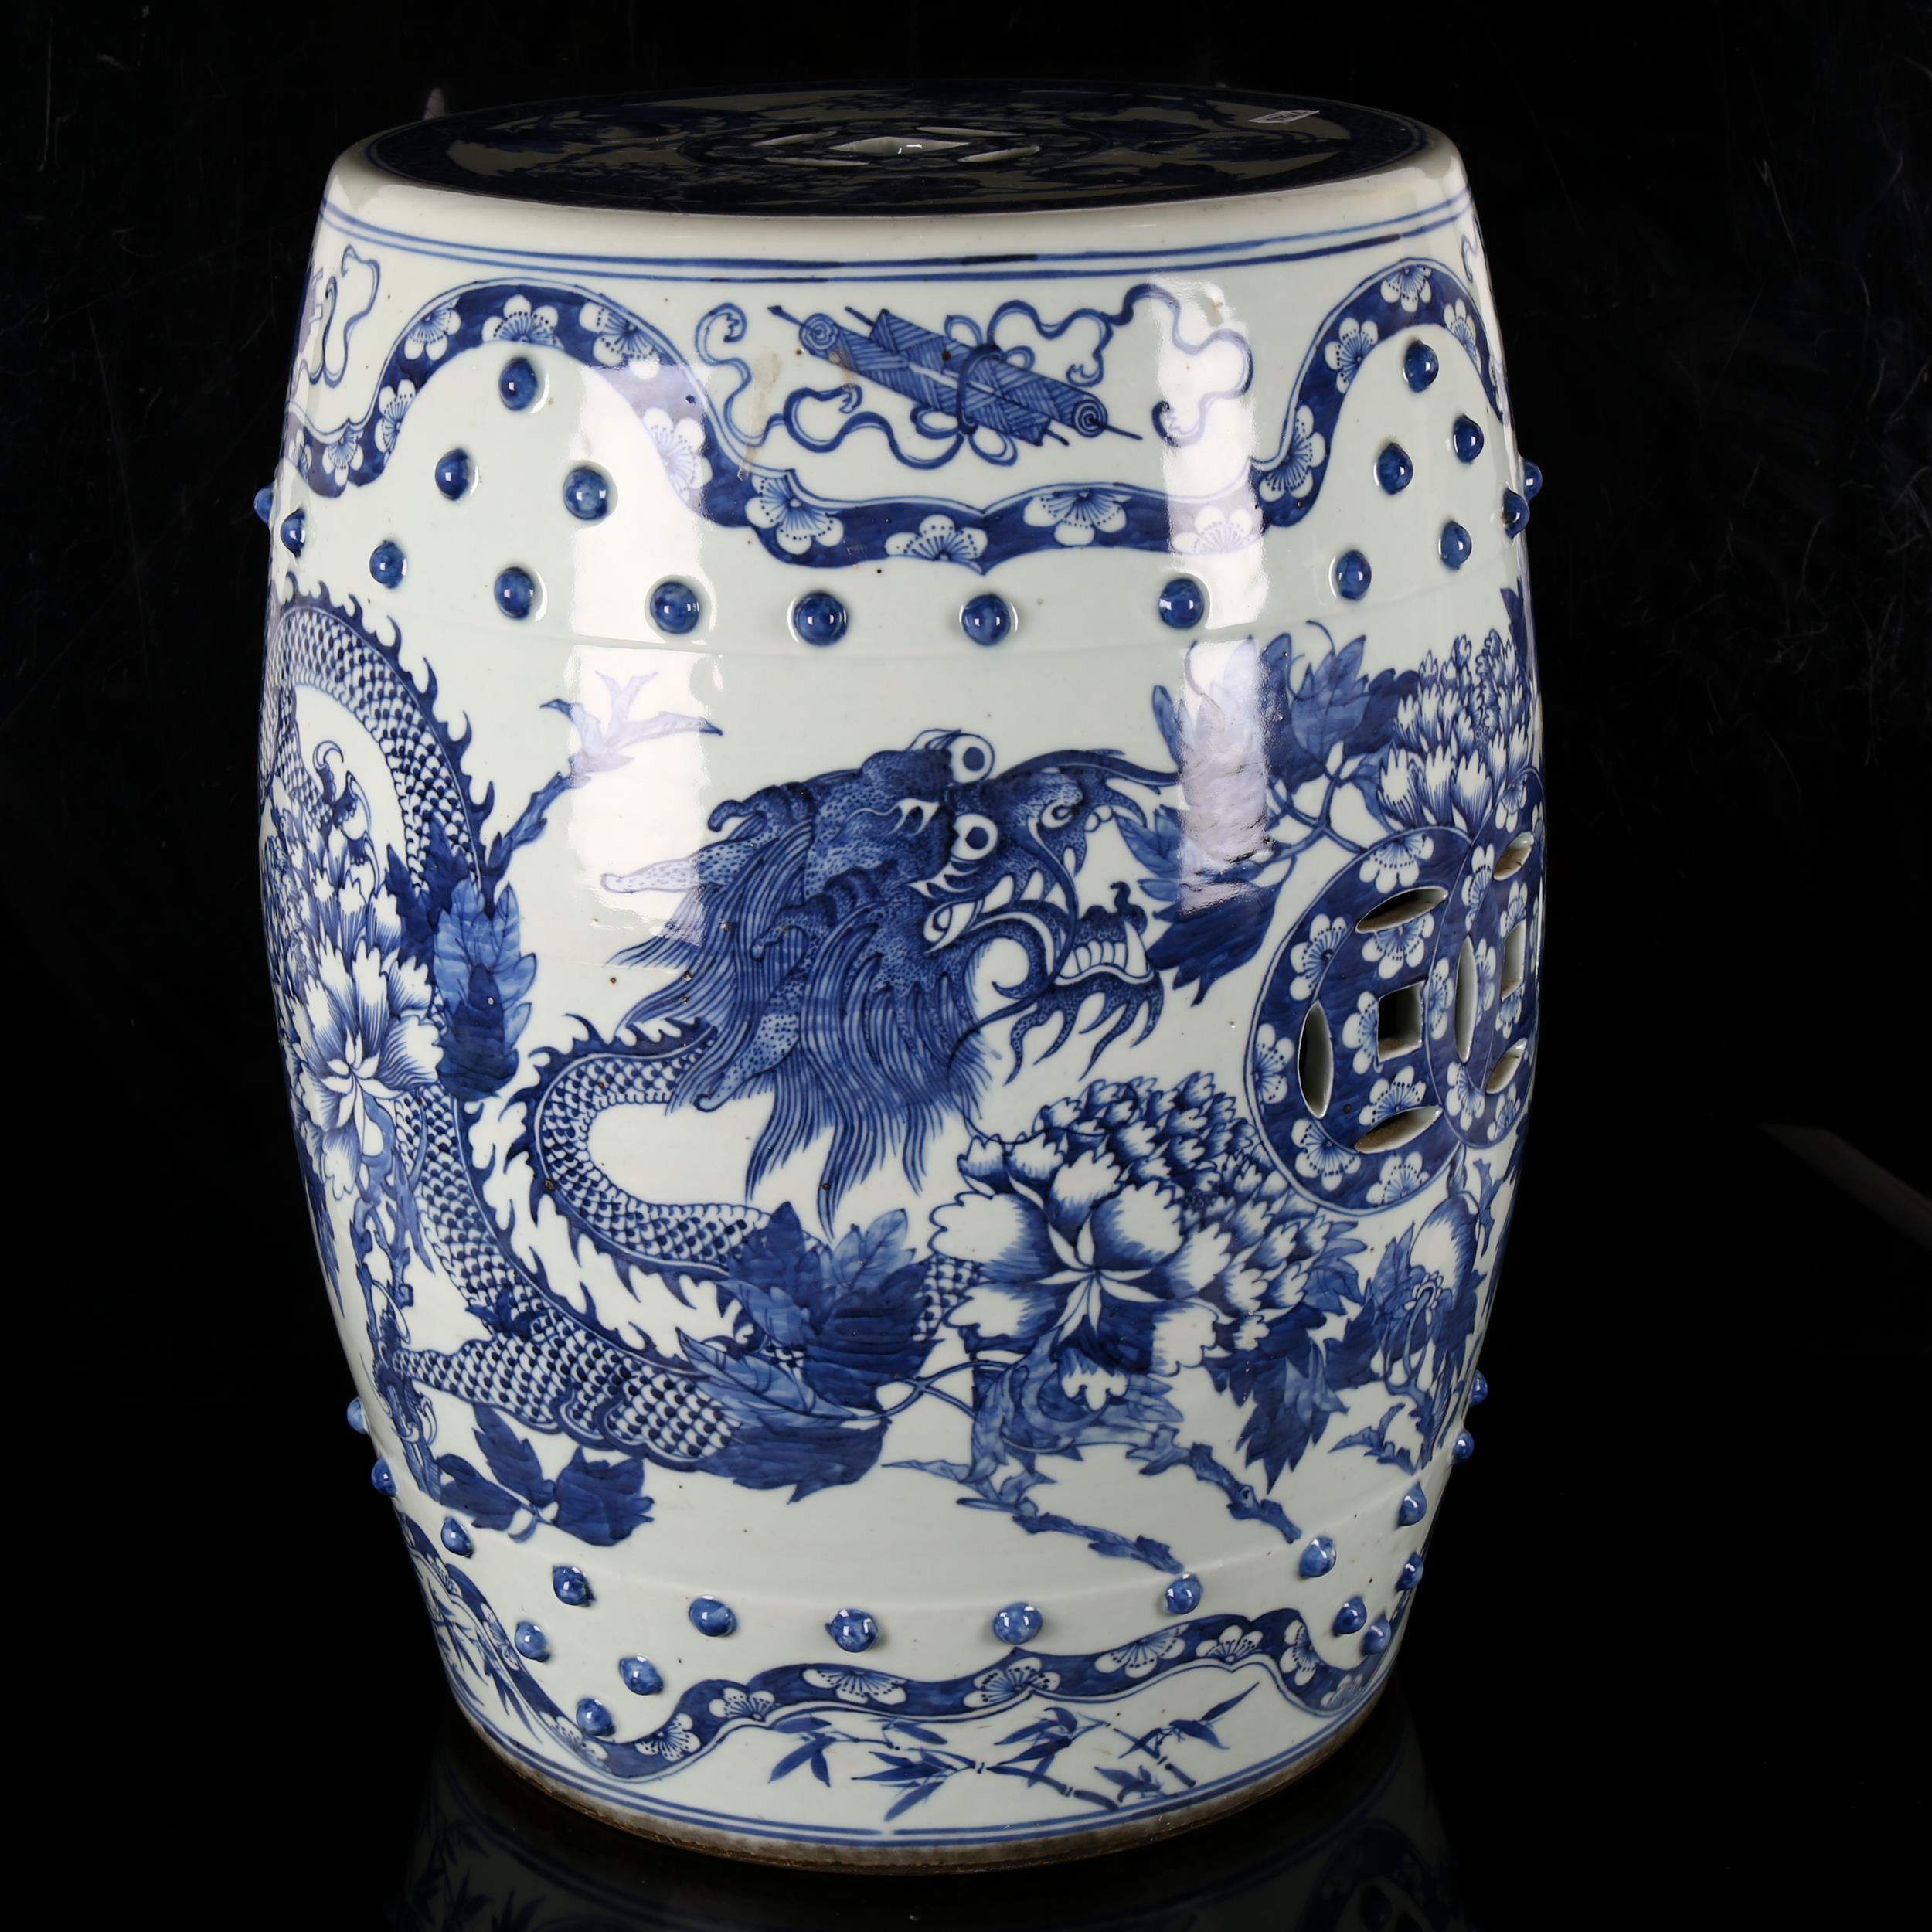 A Chinese blue and white 'Dragon' garden barrel seat, 19th century, underglaze blue decorated with - Image 7 of 10